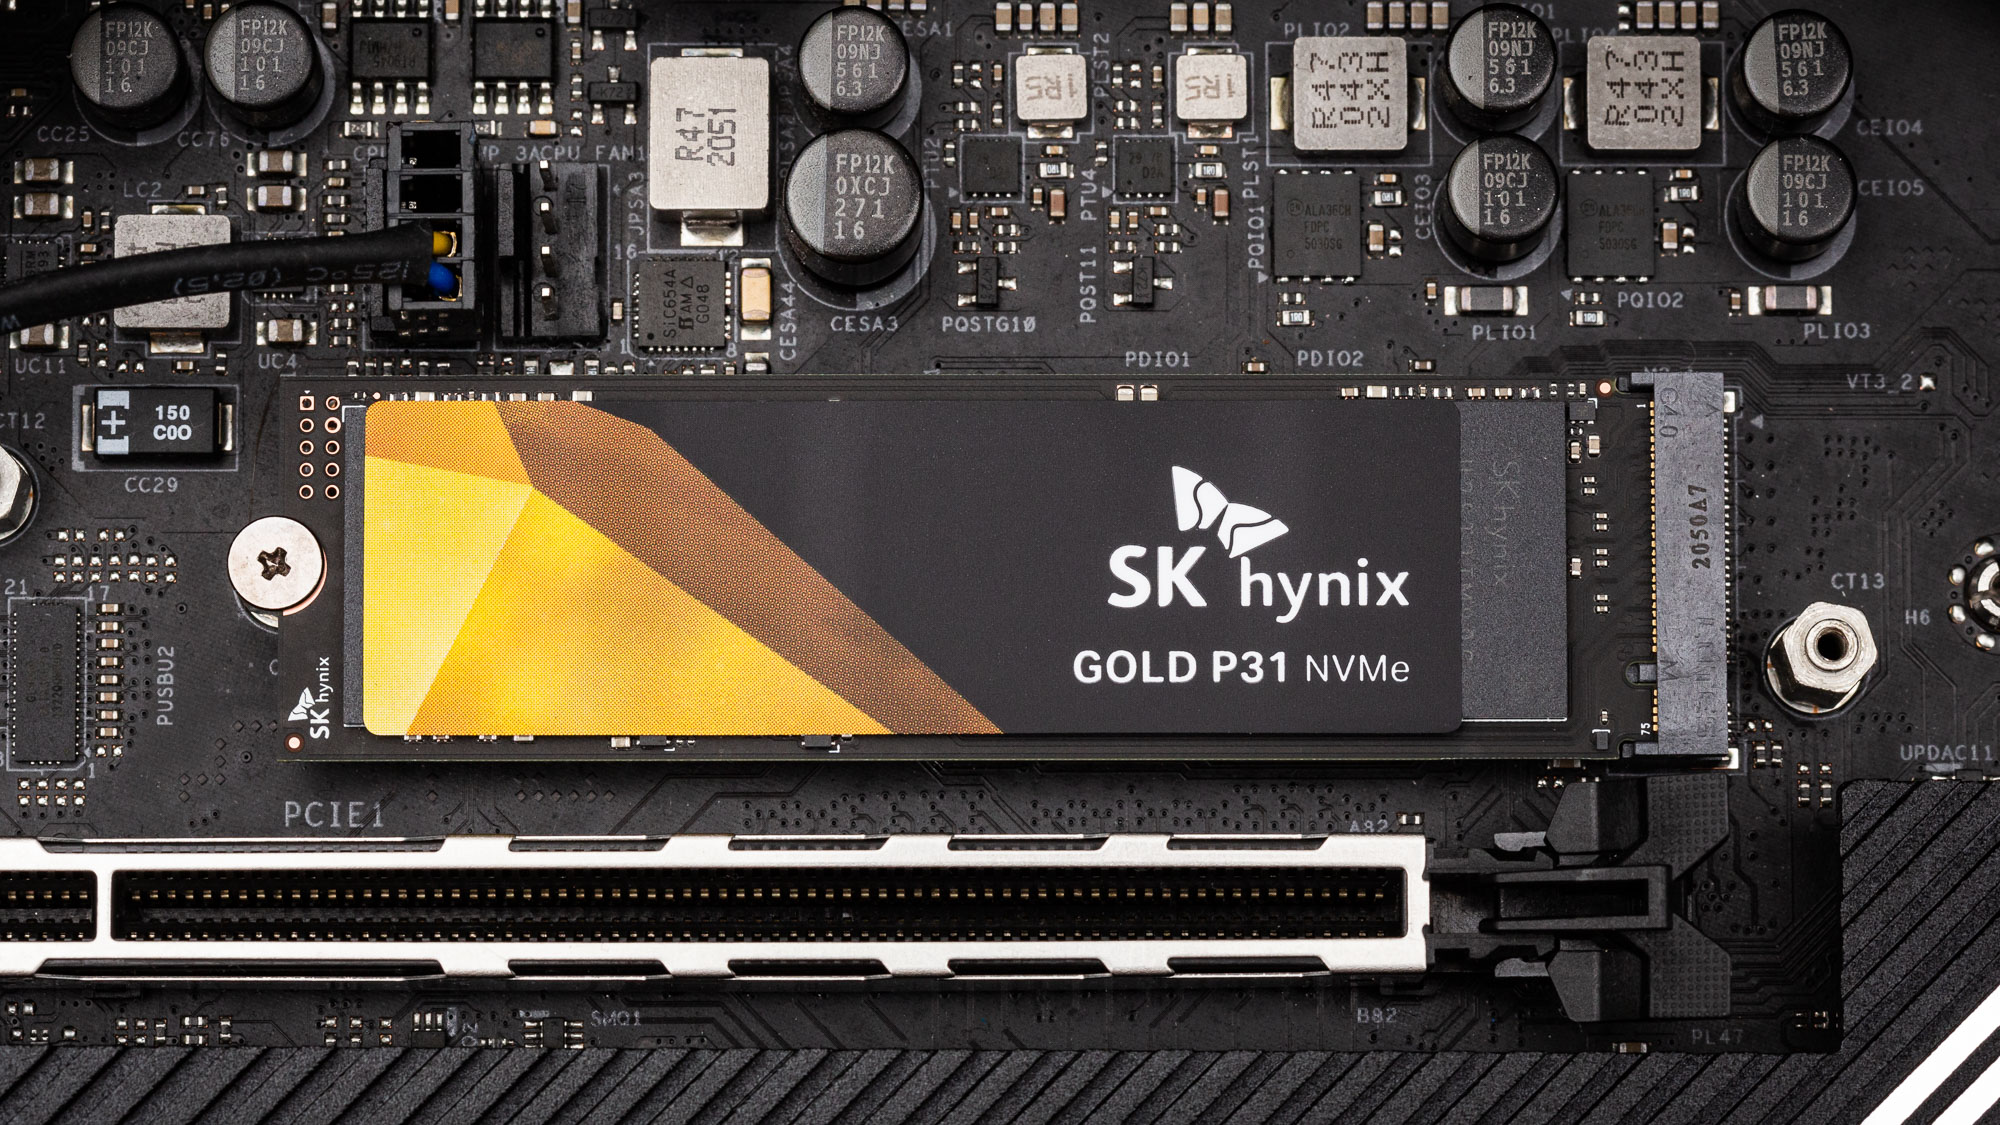 SK hynix Gold P31 M.2 NVMe SSD Review: High-Performance 